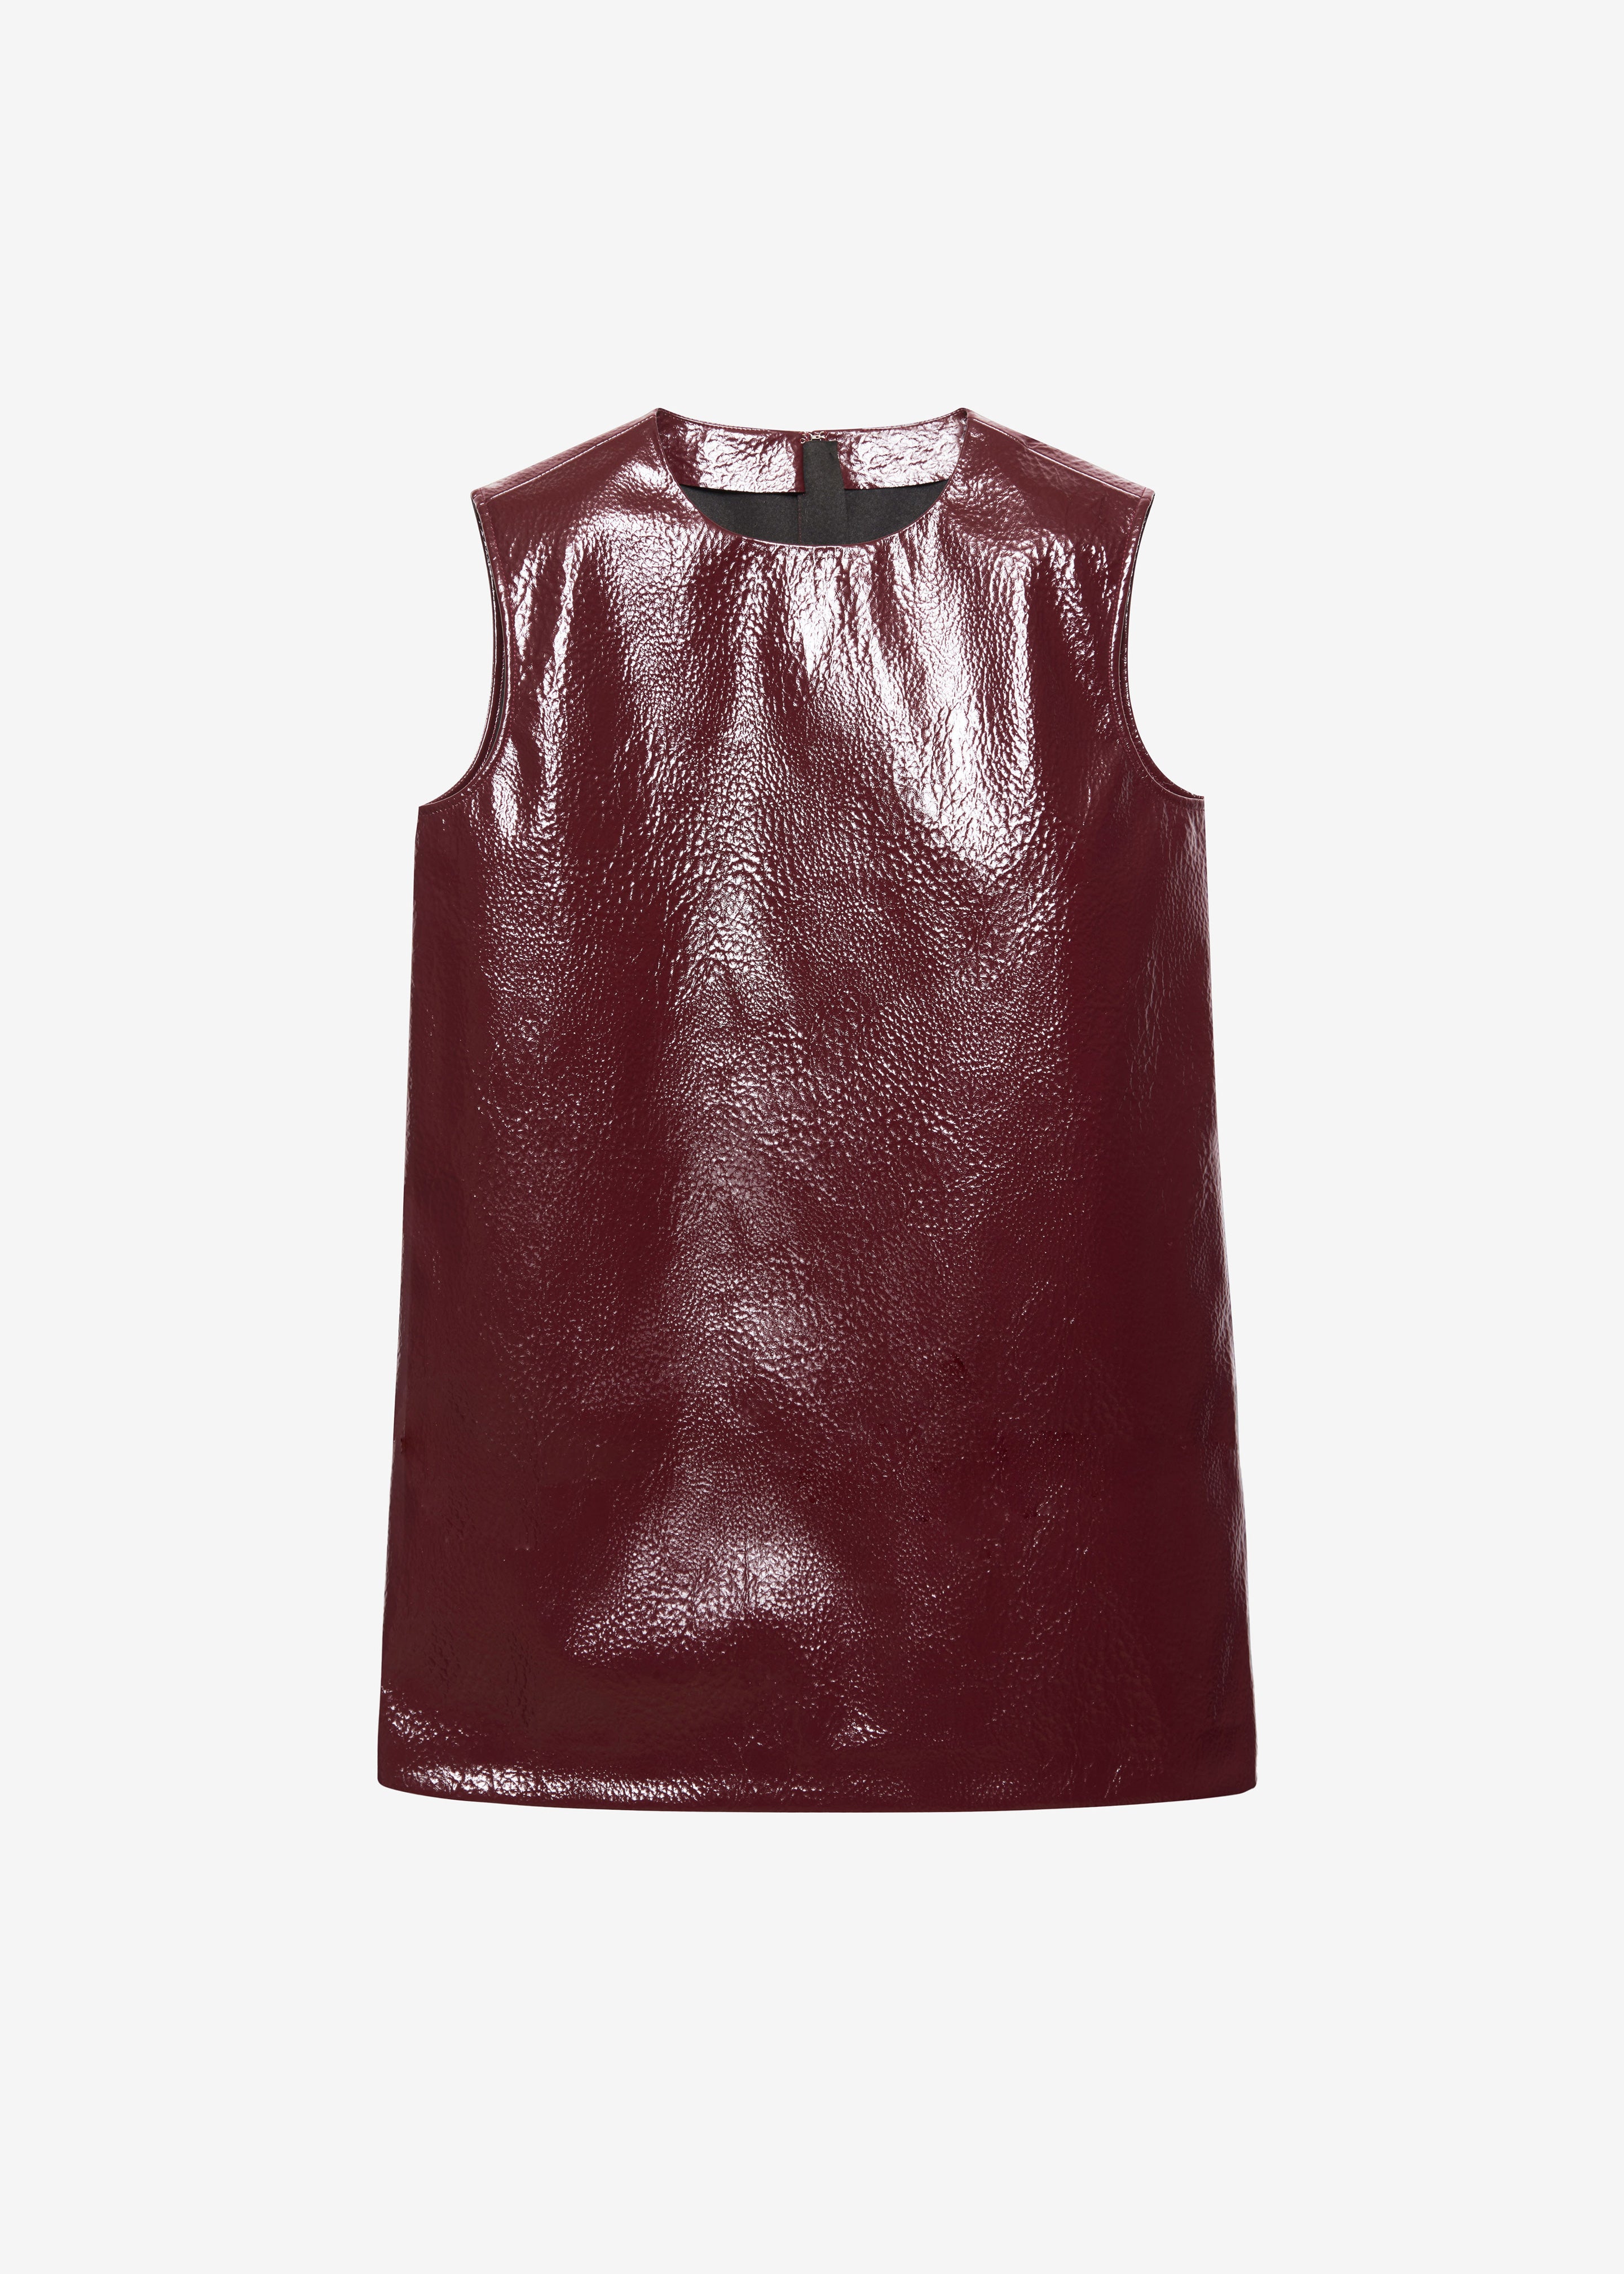 Amaris Crackled Faux Leather Tank Top - Burgundy - 9